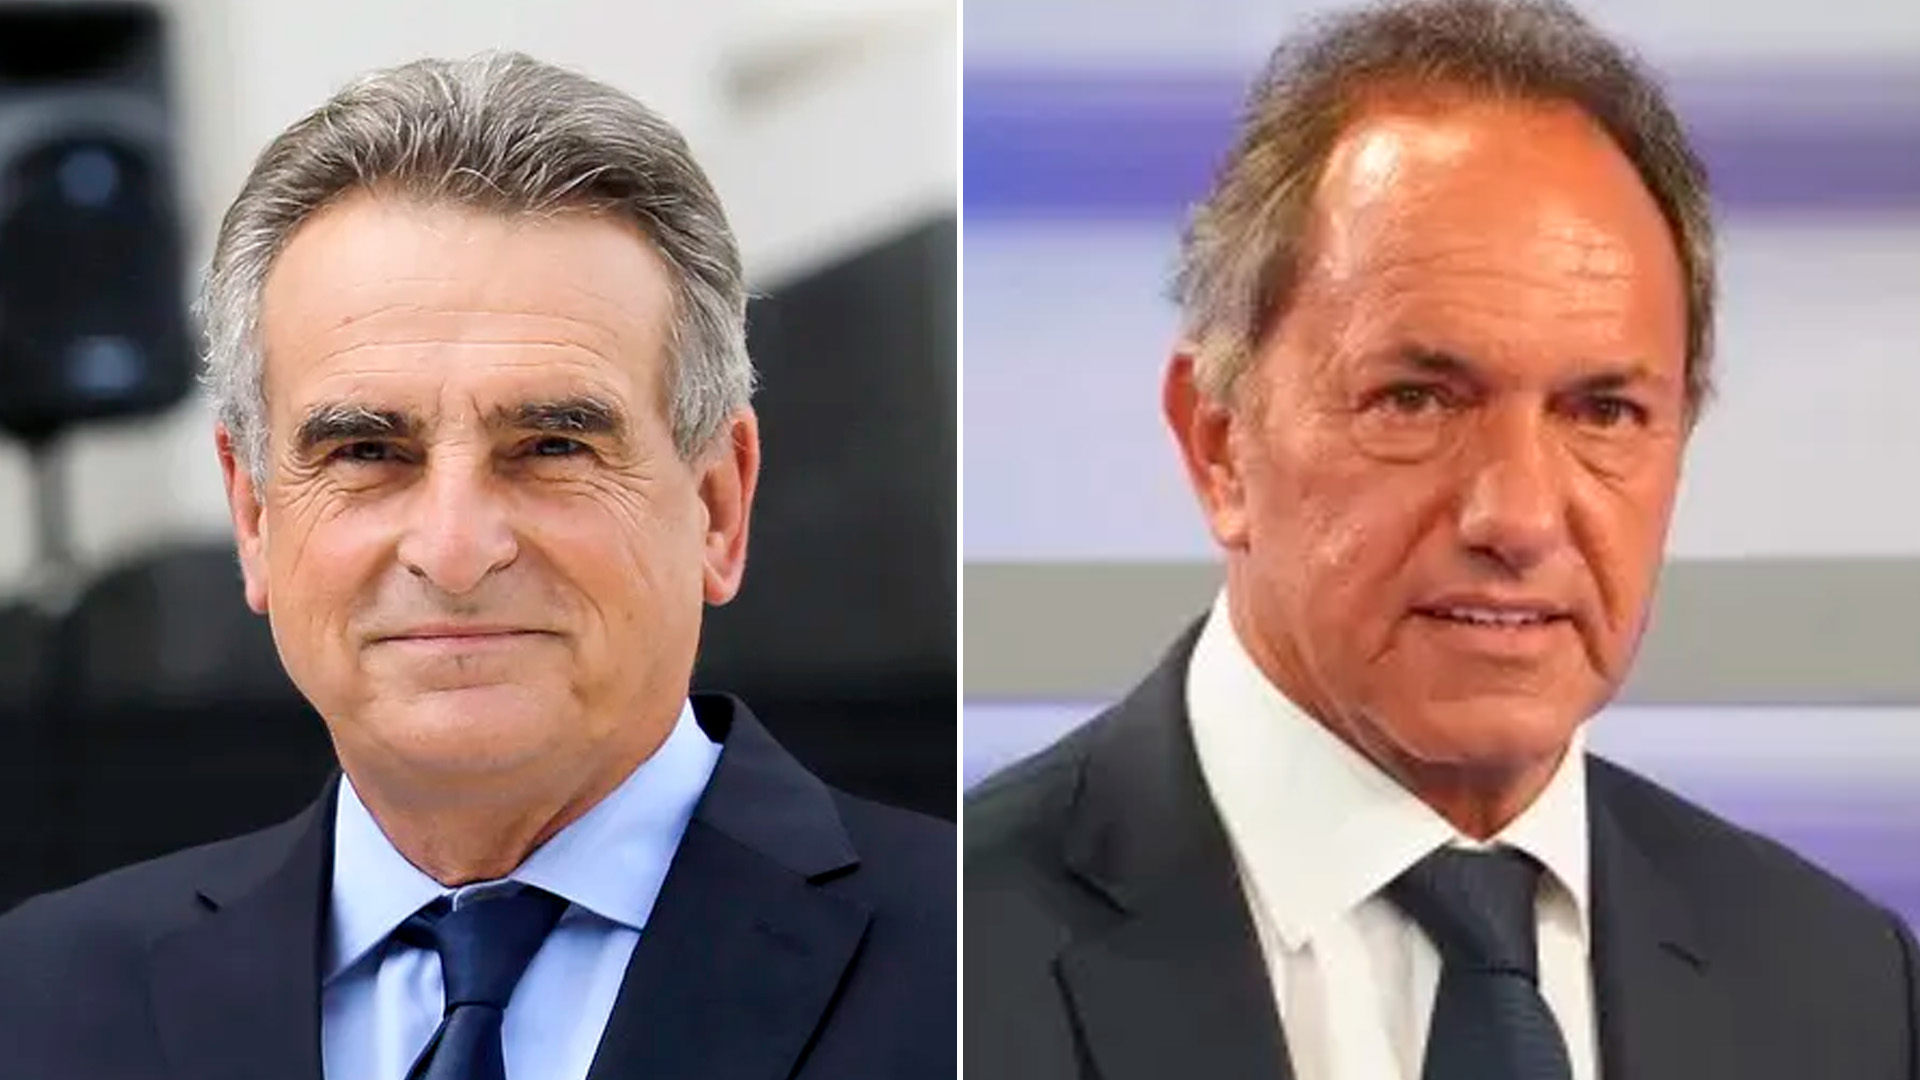 Some sectors expect Agustín Rossi and Daniel Scioli to bring an air of renewal to the Government